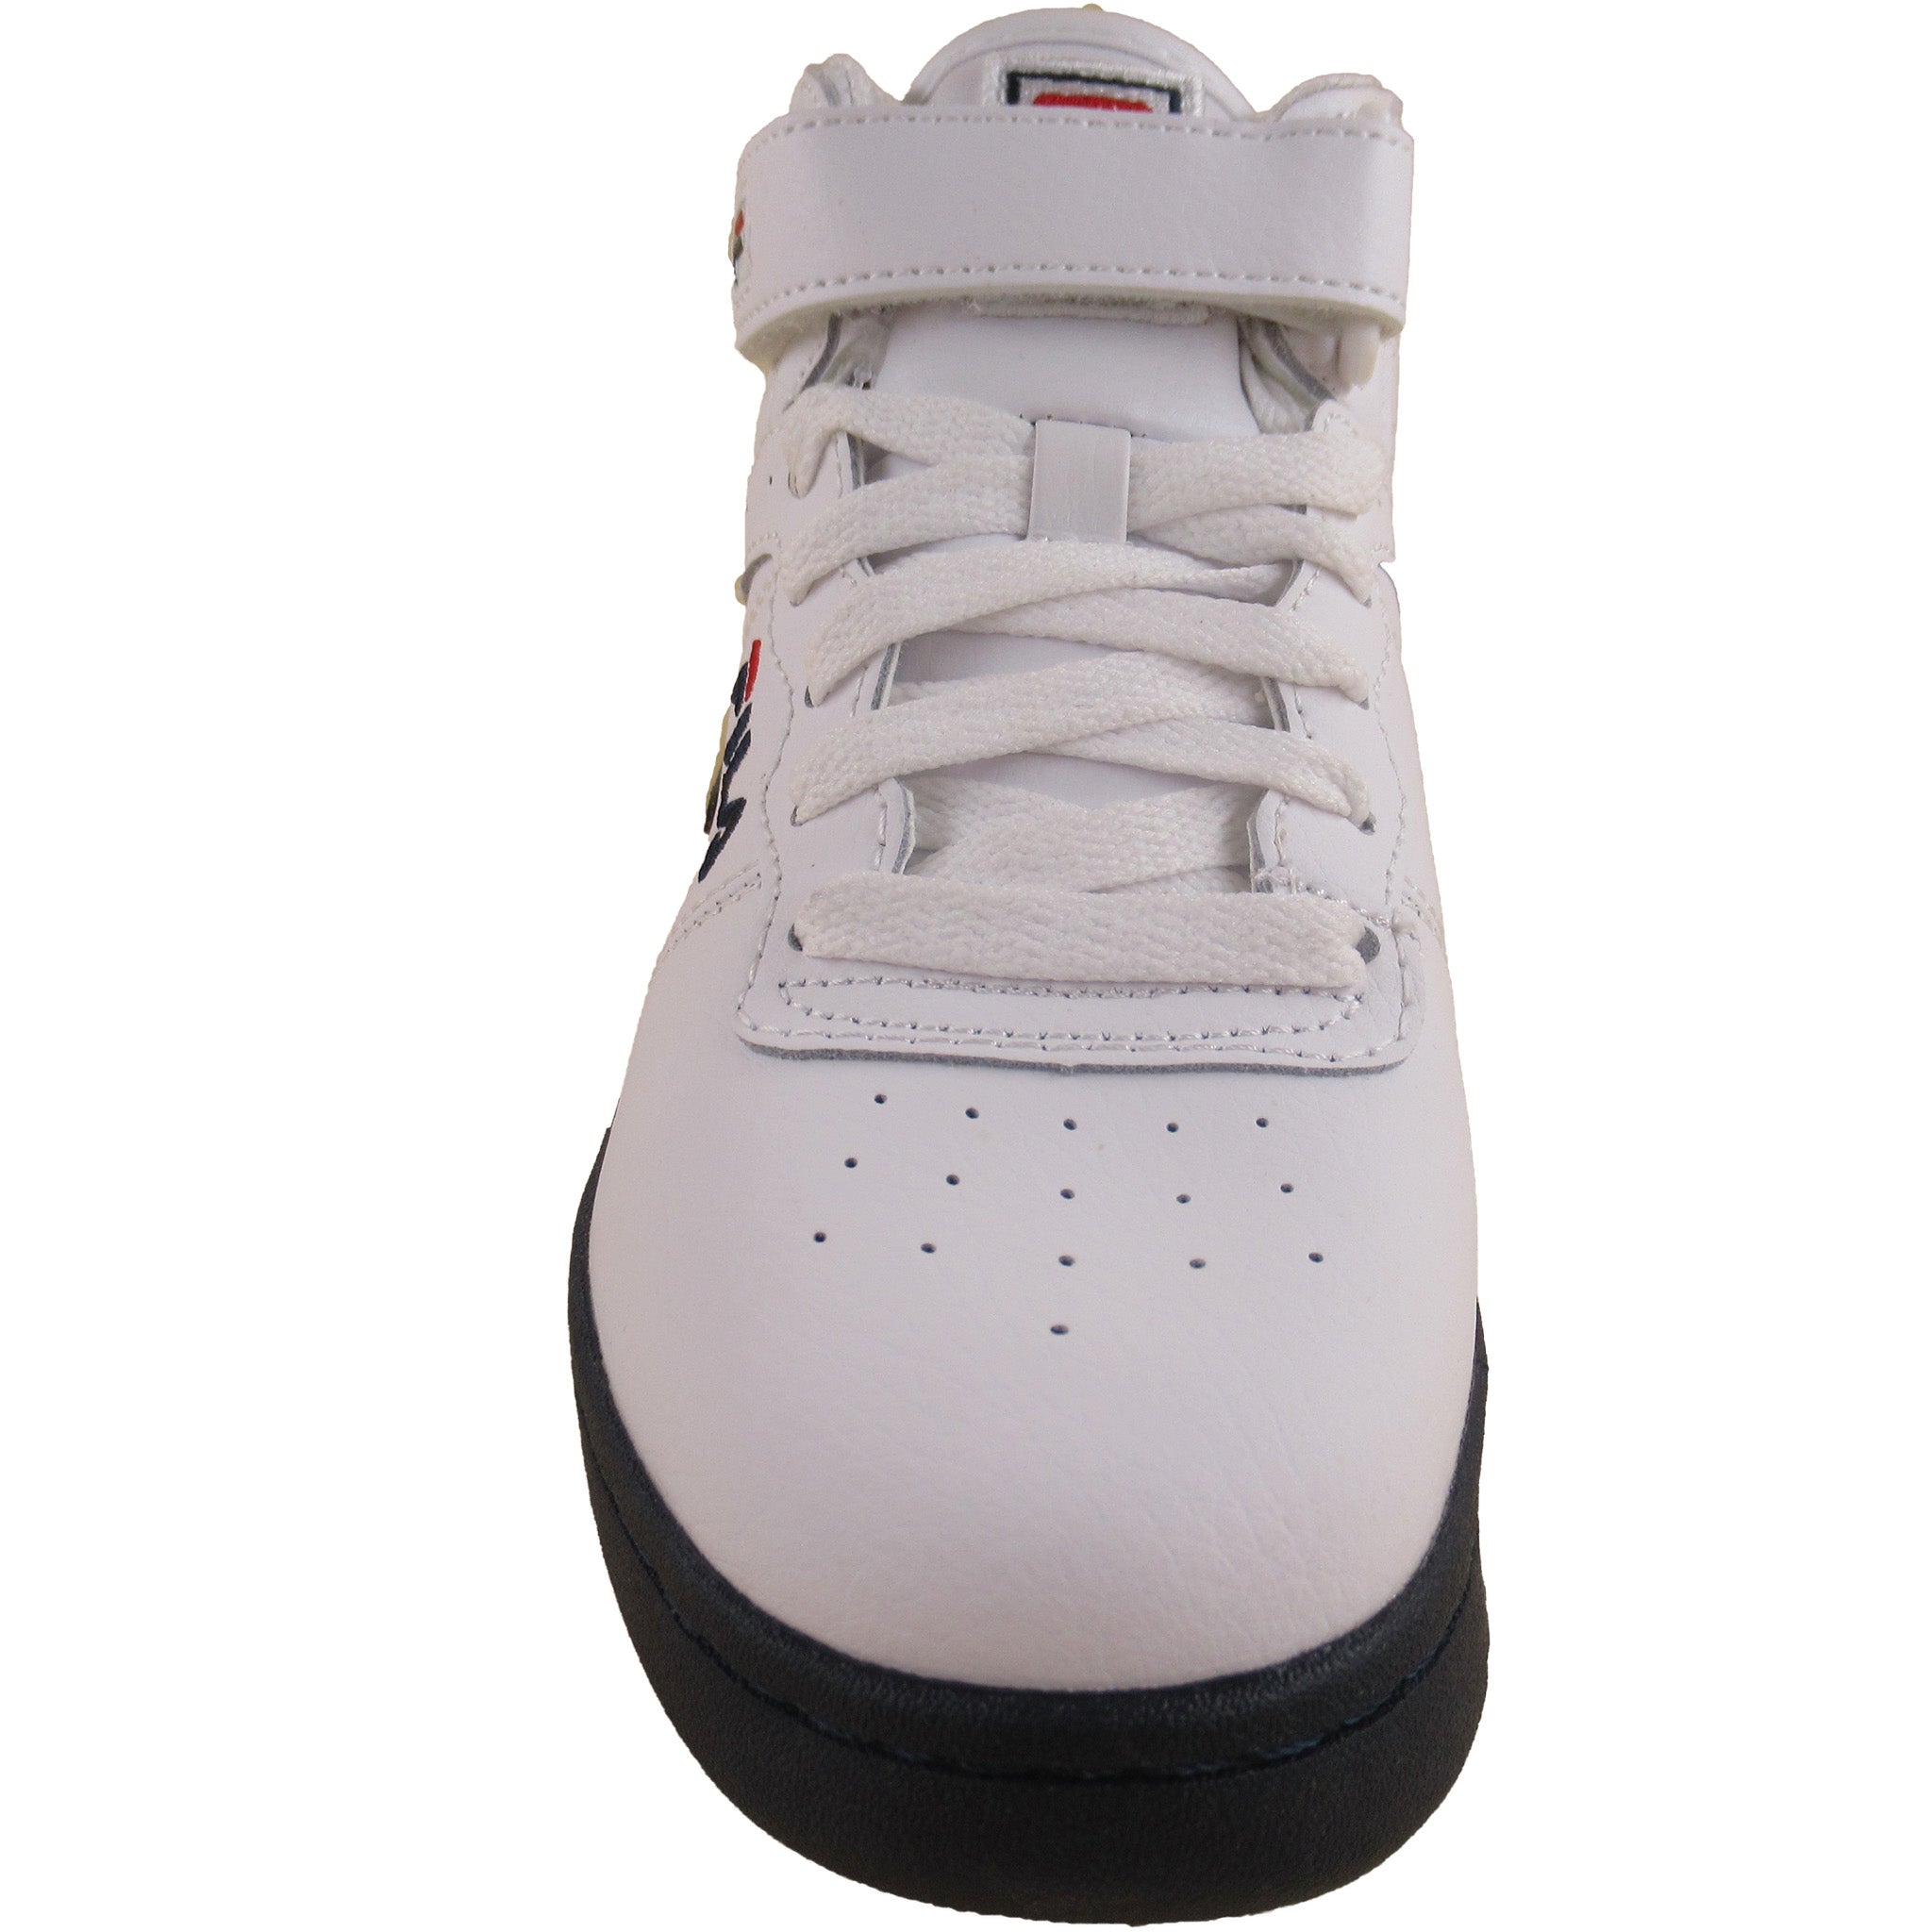 Fila Men's F13 F-13 Classic Casual Retro Athletic Shoes – That Shoe Store  and More